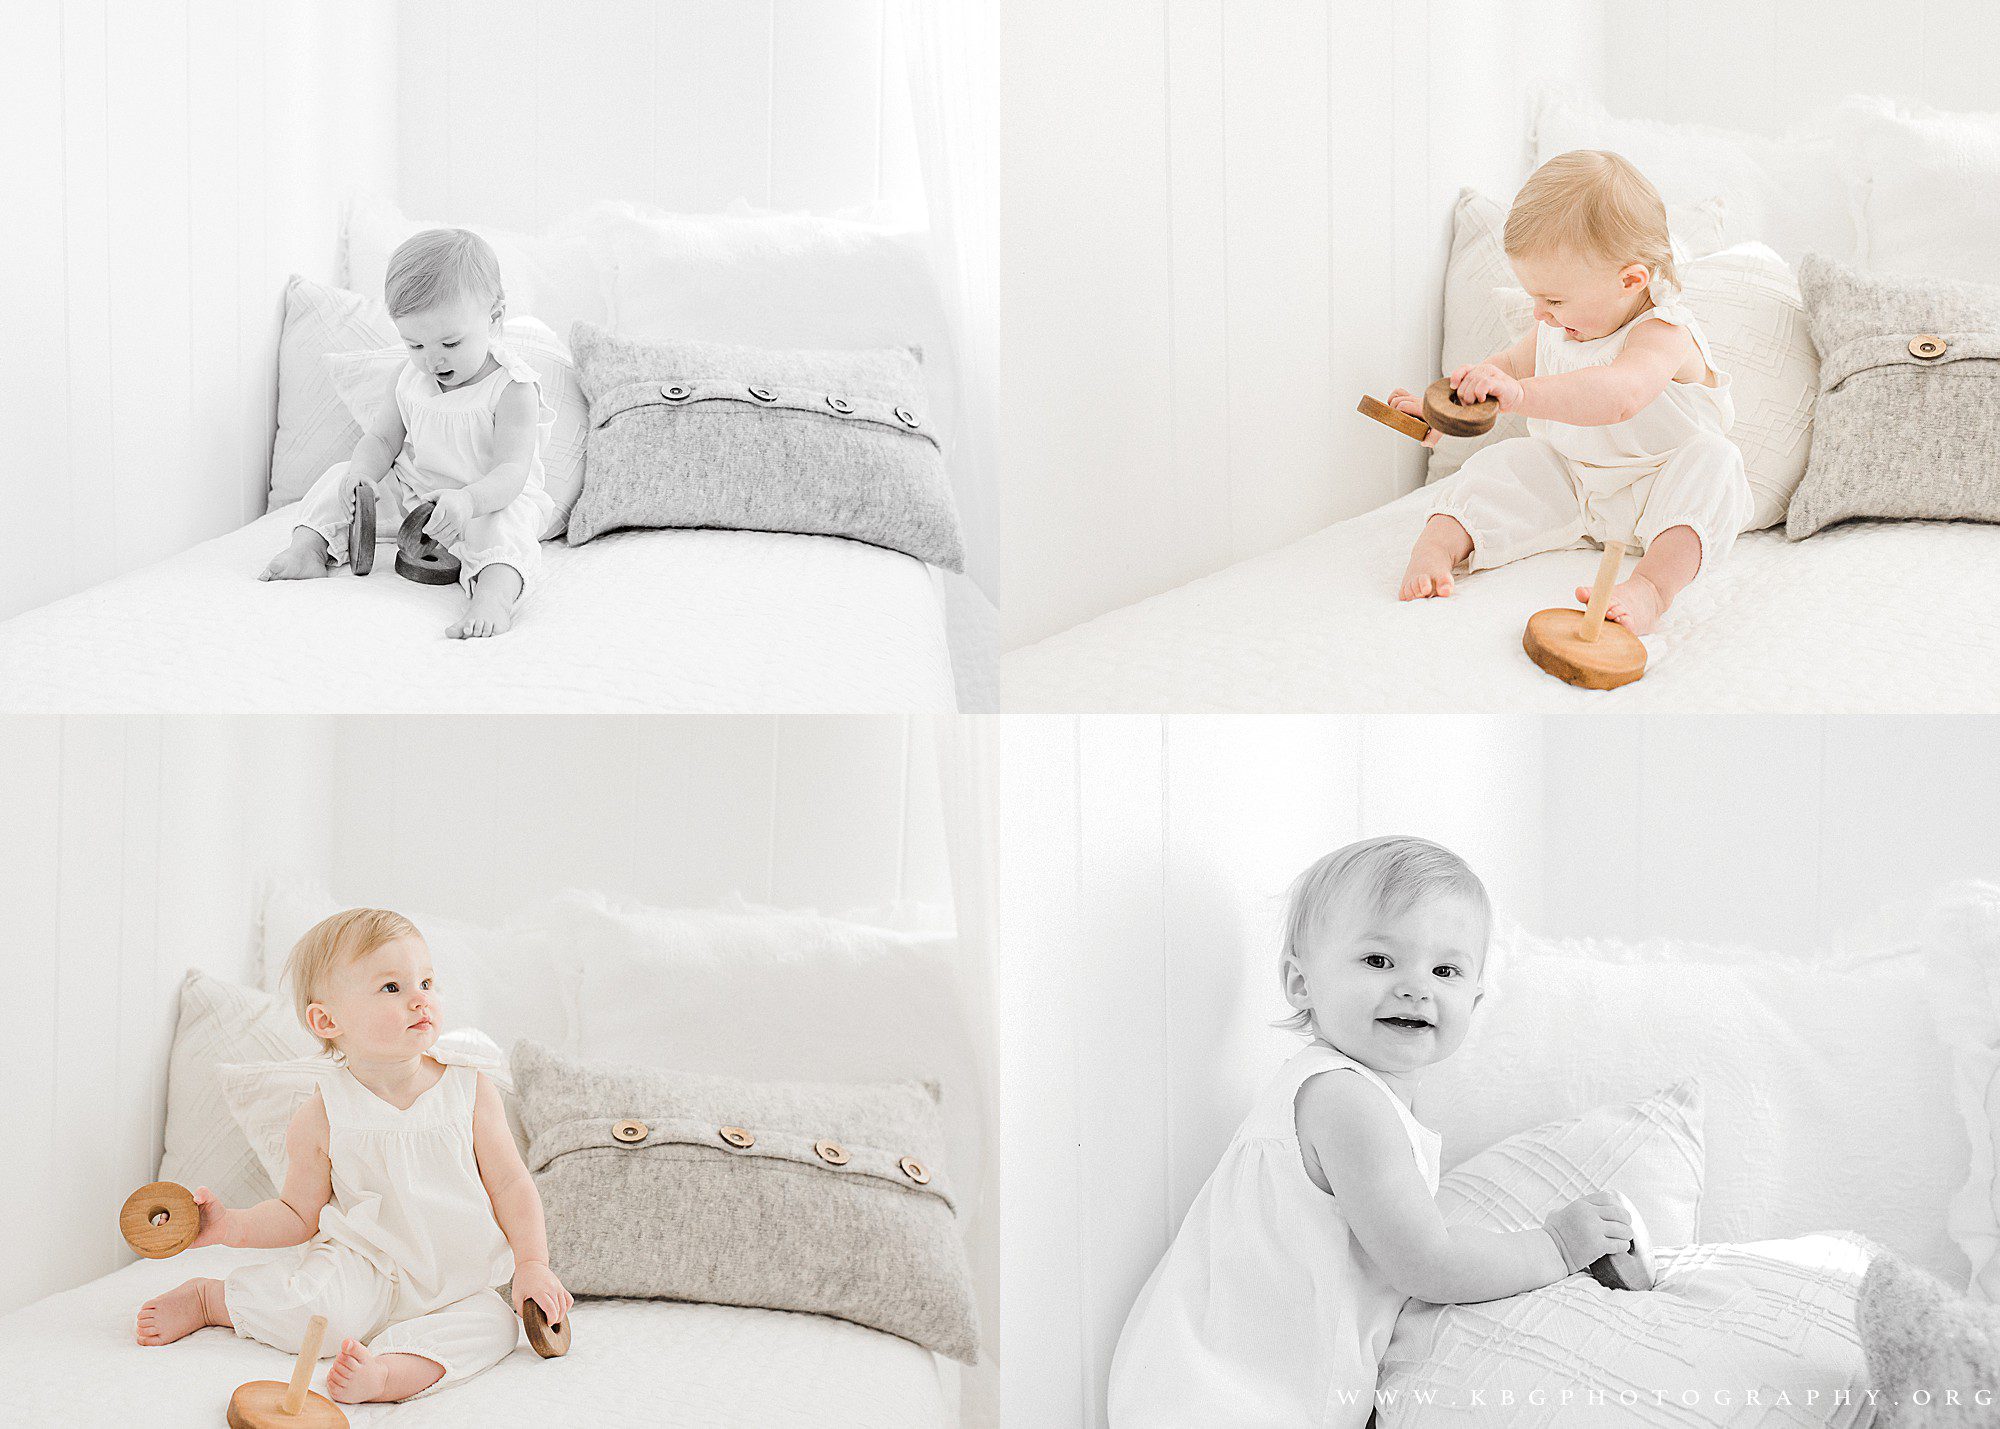 marietta baby photographer - one year old baby playing with blocks on the bed